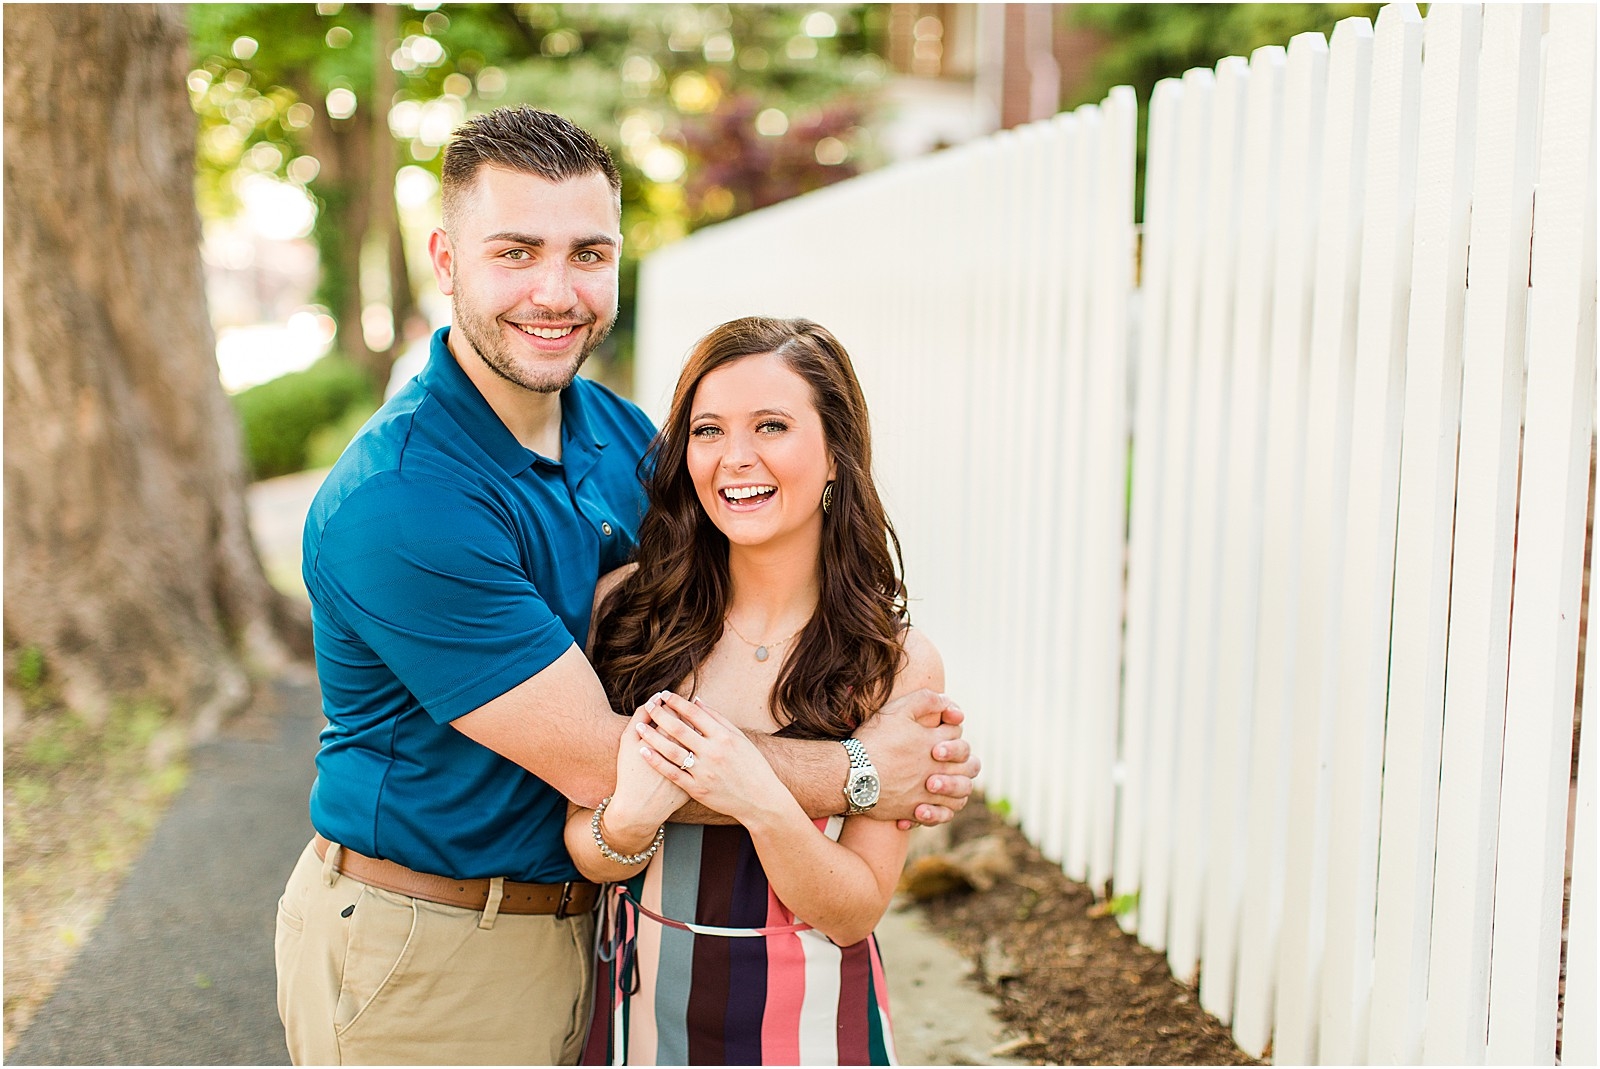 Downtown Newburgh Engagement Session | Matt and Blaire | Bret and Brandie Photography013.jpg